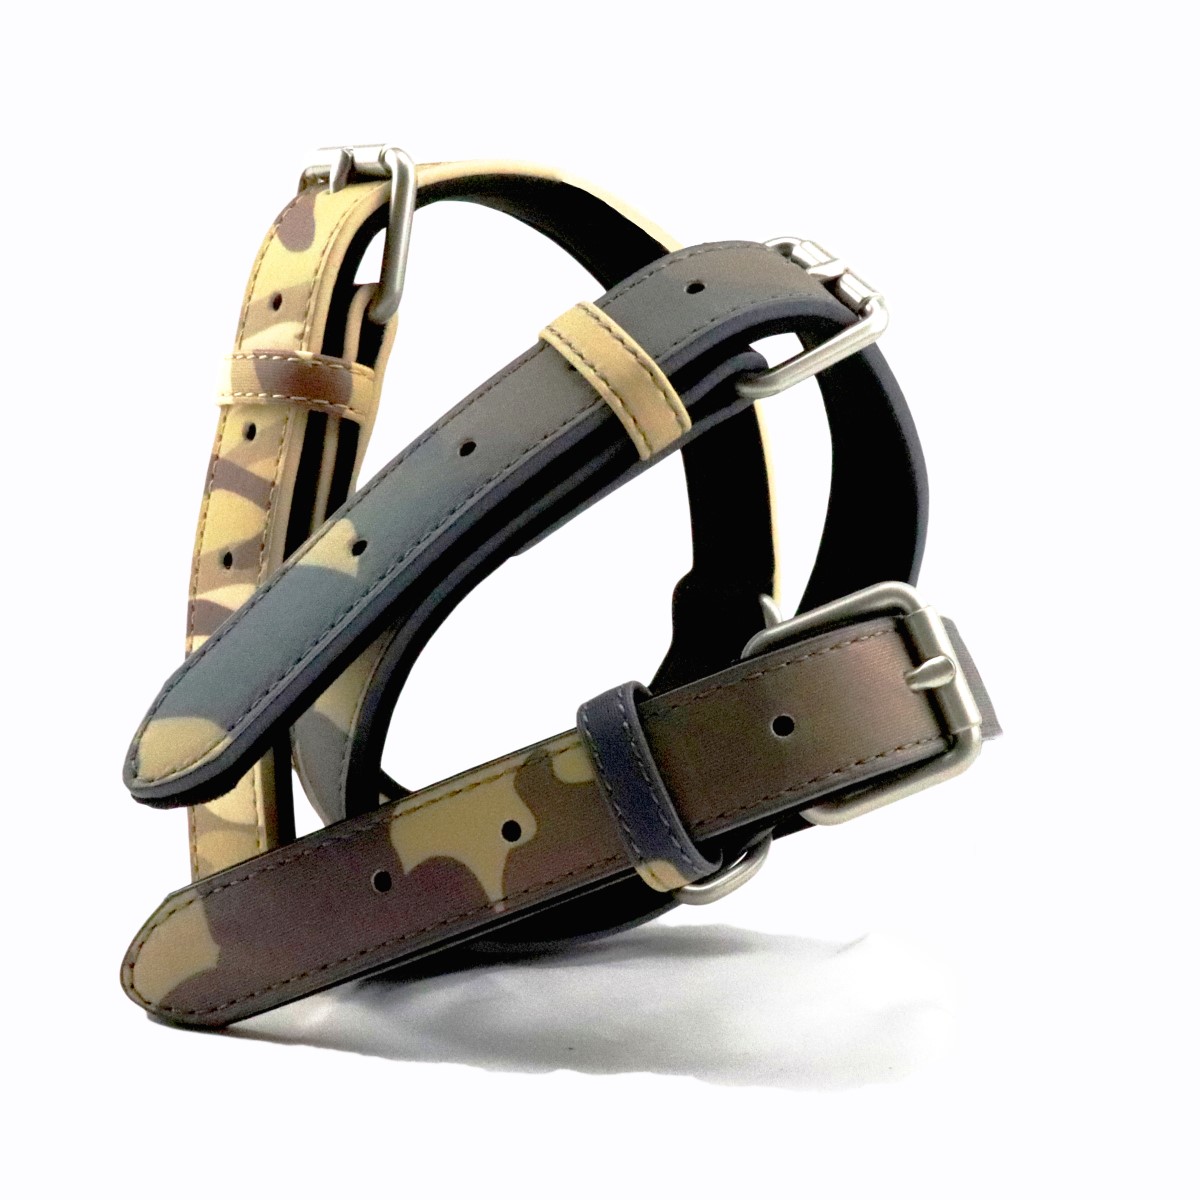 Reflective collars from RubyPet showing colourful camouflage patterns